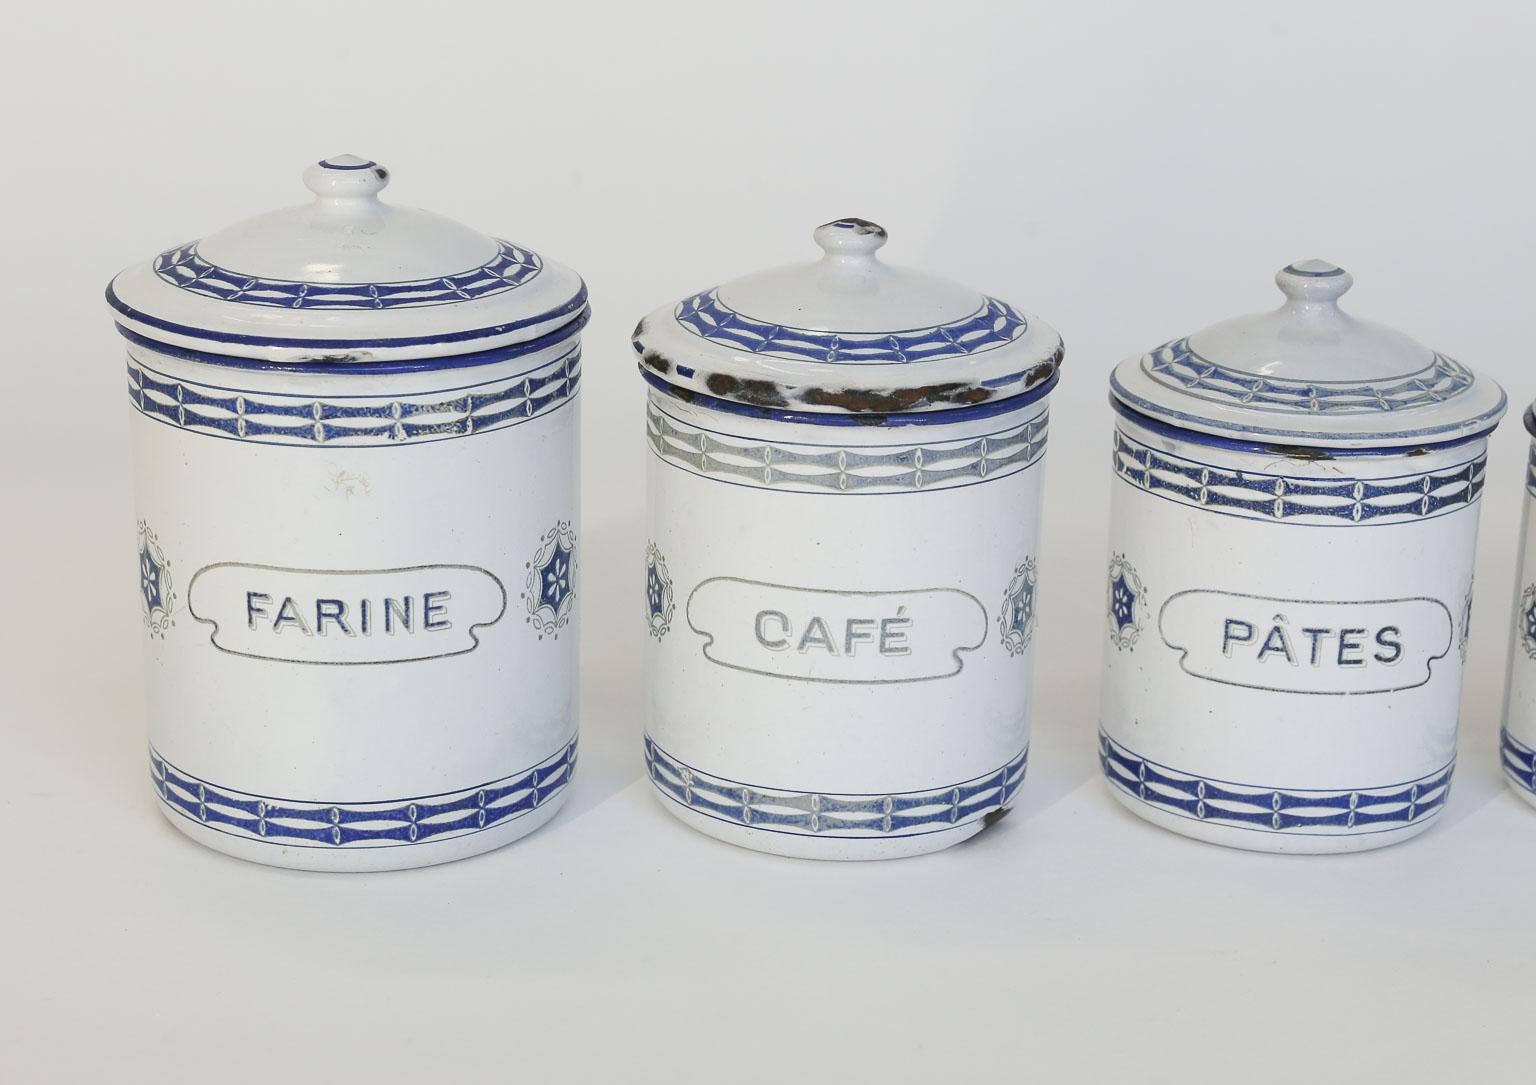 This French enamel canister set consists of five, graduated, lidded canisters. The canisters are white and blue enamel with black lettering.
Farine - Flour, 7